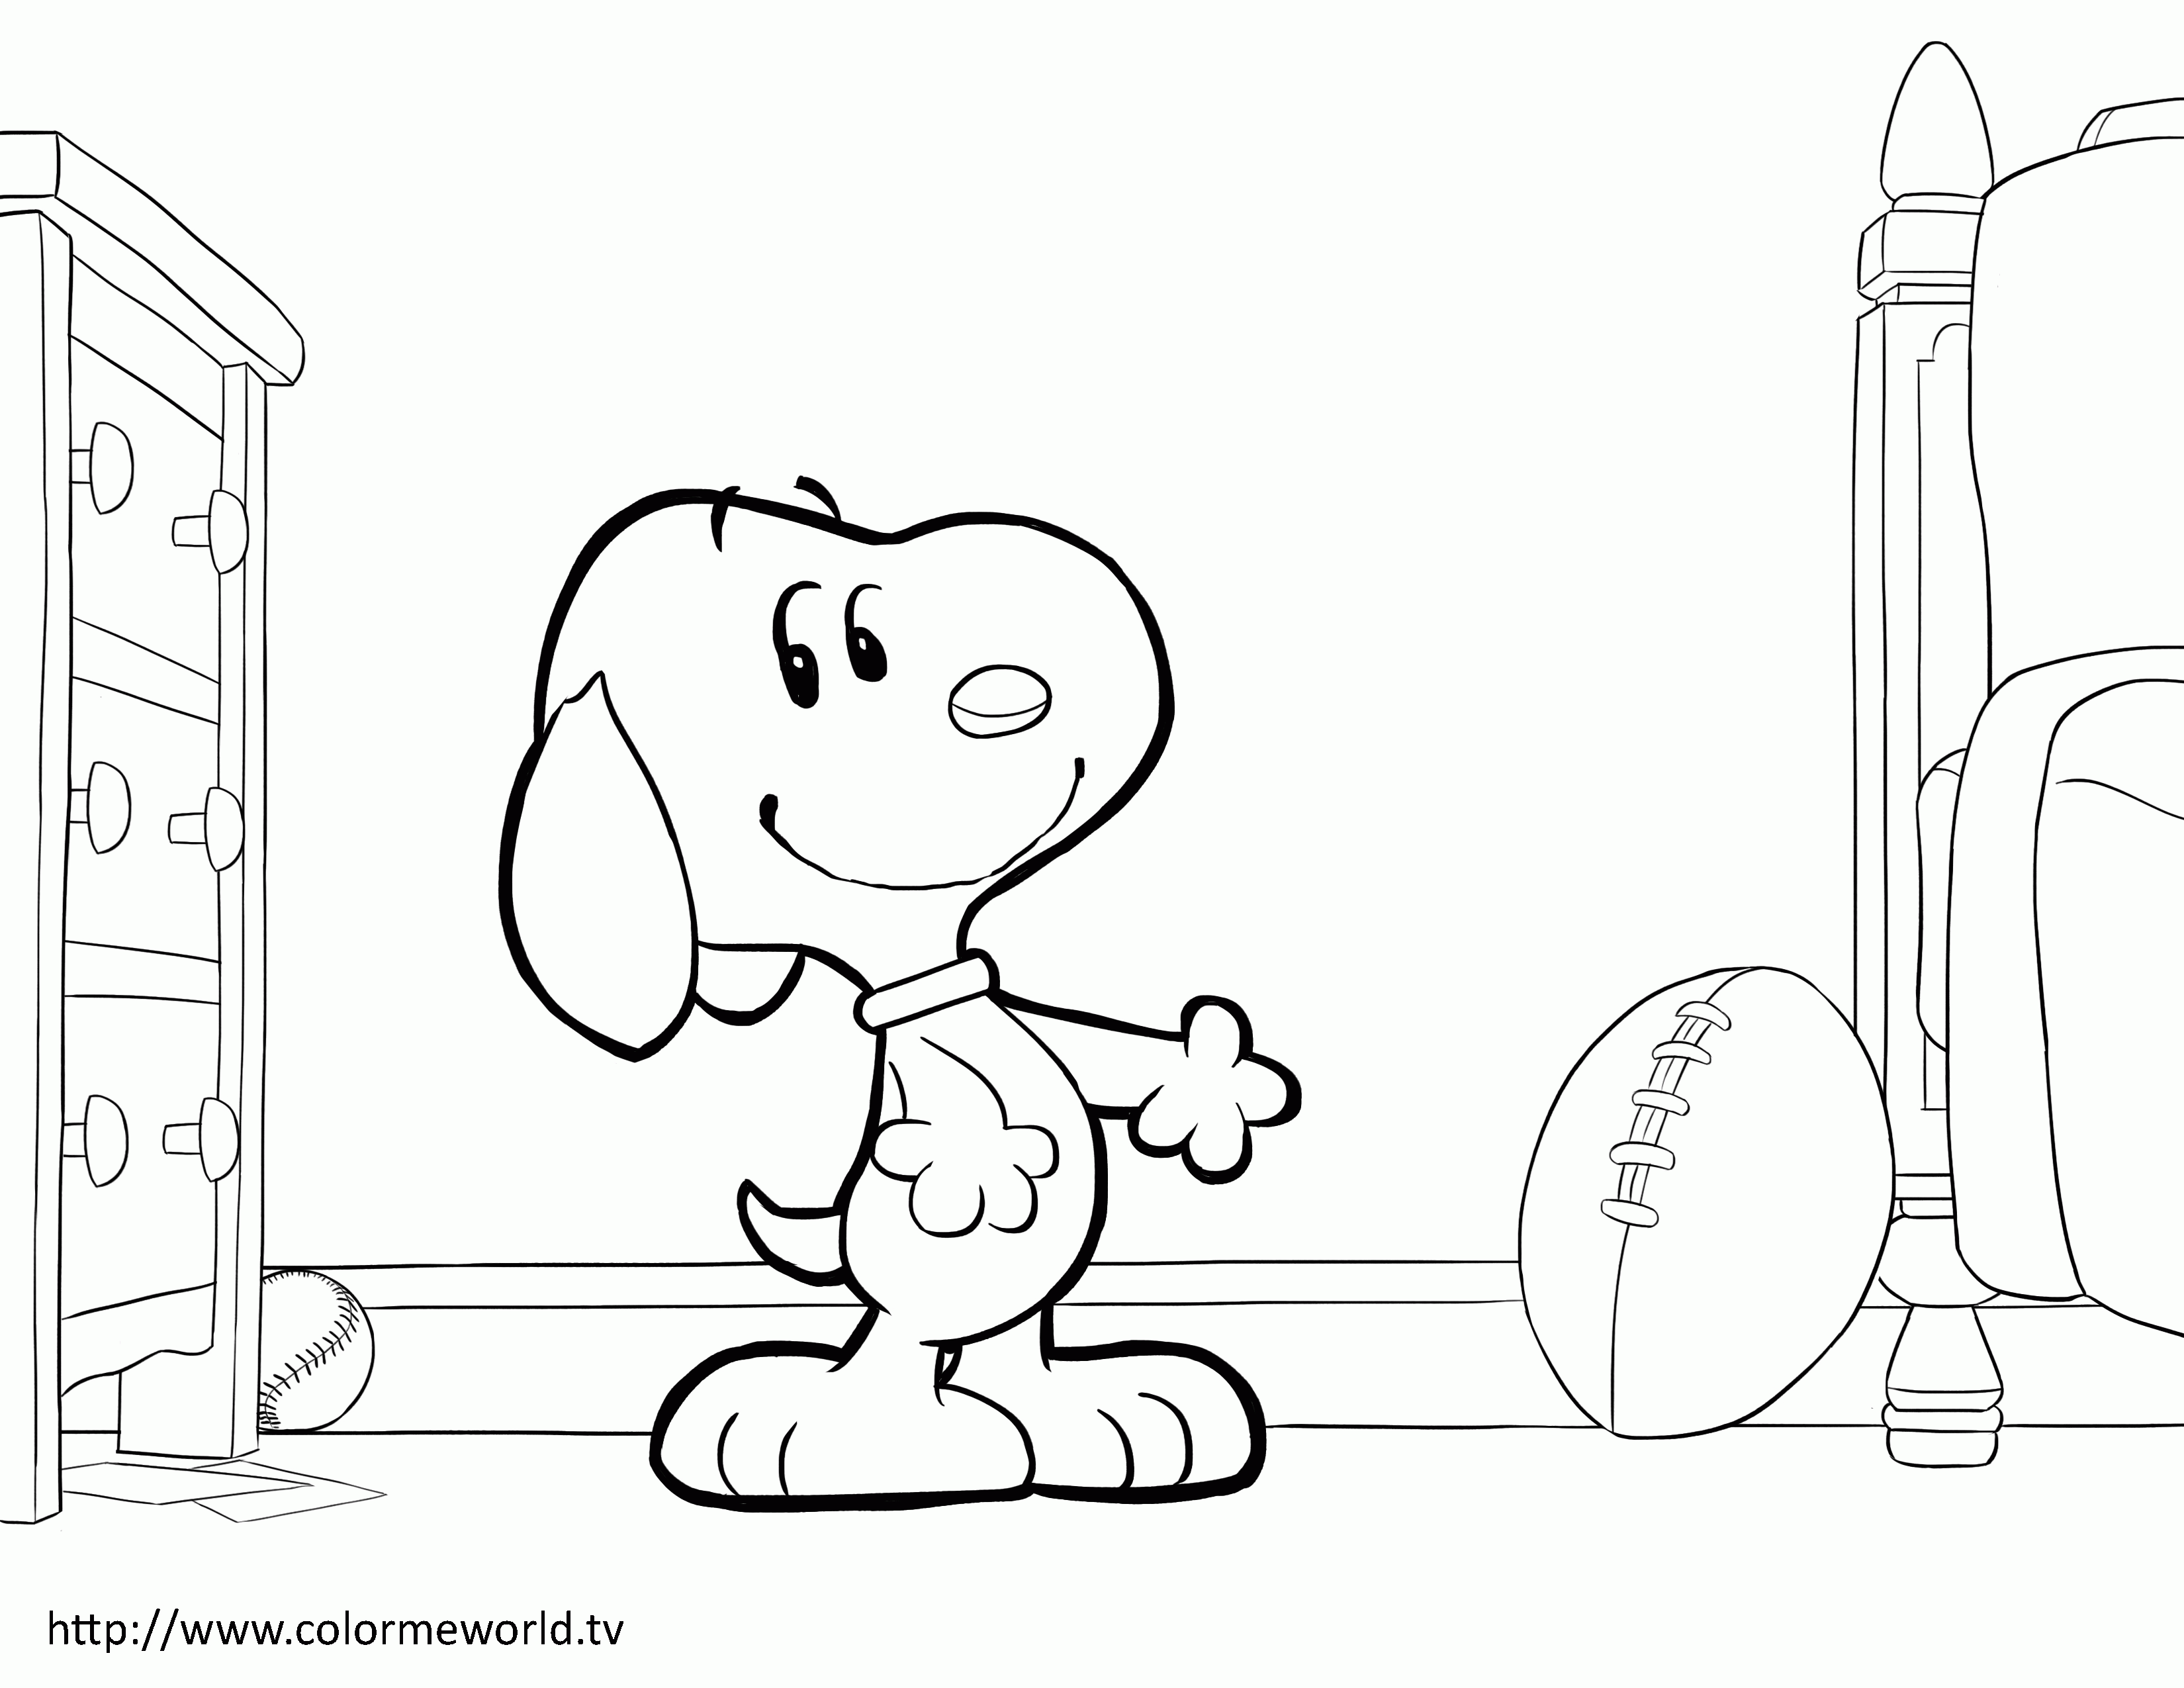 8 Pics of Woodstock Coloring Pages - Snoopy and Woodstock Coloring ...